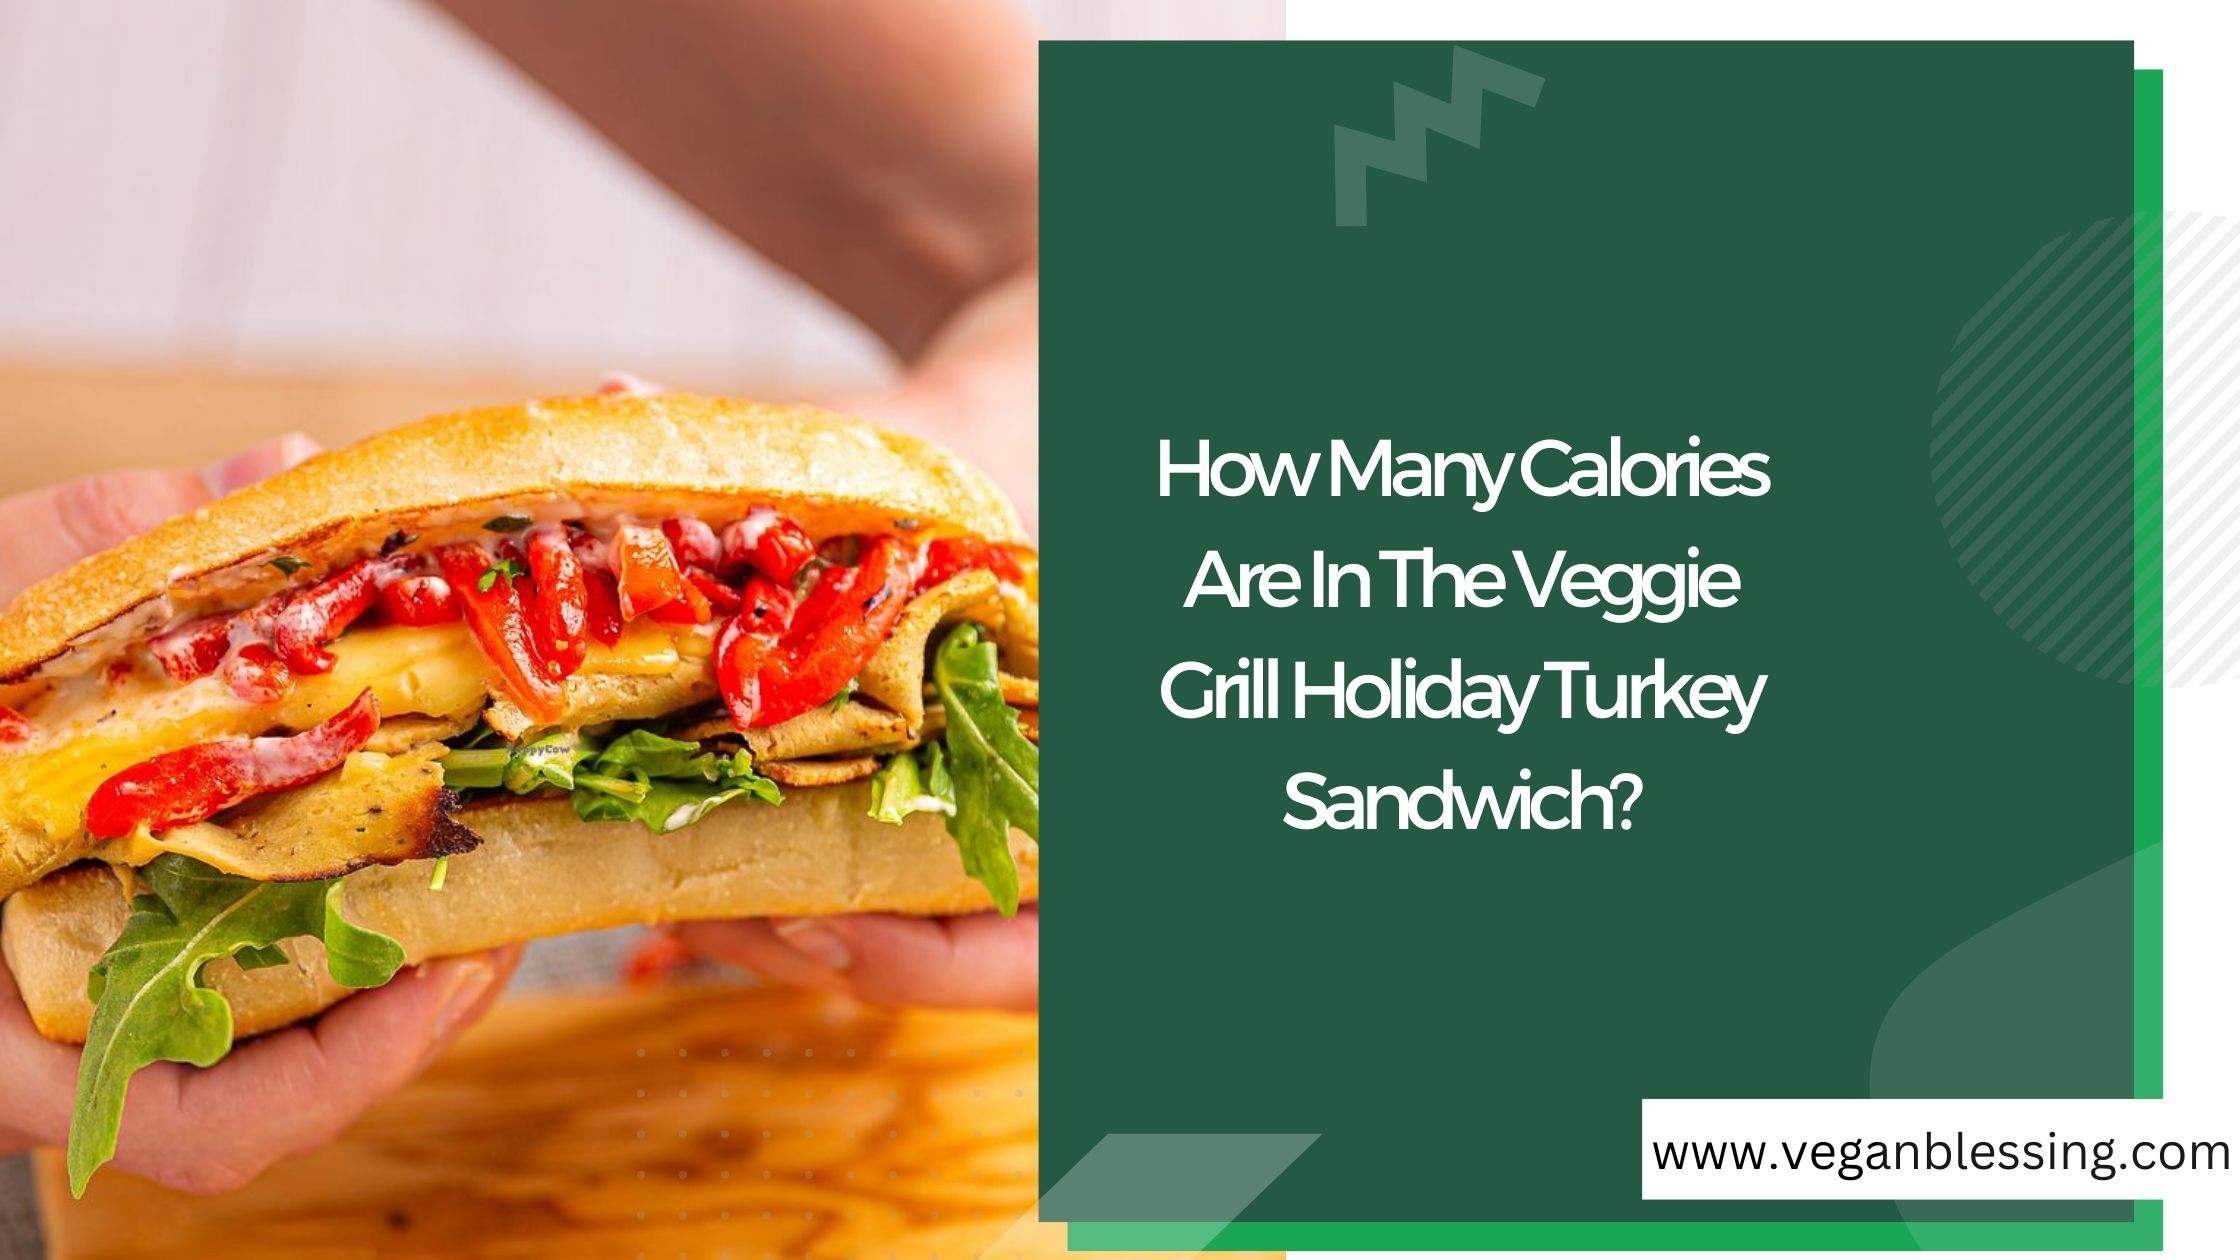 How Many Calories Are In The Veggie Grill Holiday Turkey Sandwich? How Many Calories Are In The Veggie Grill Holiday Turkey Sandwich